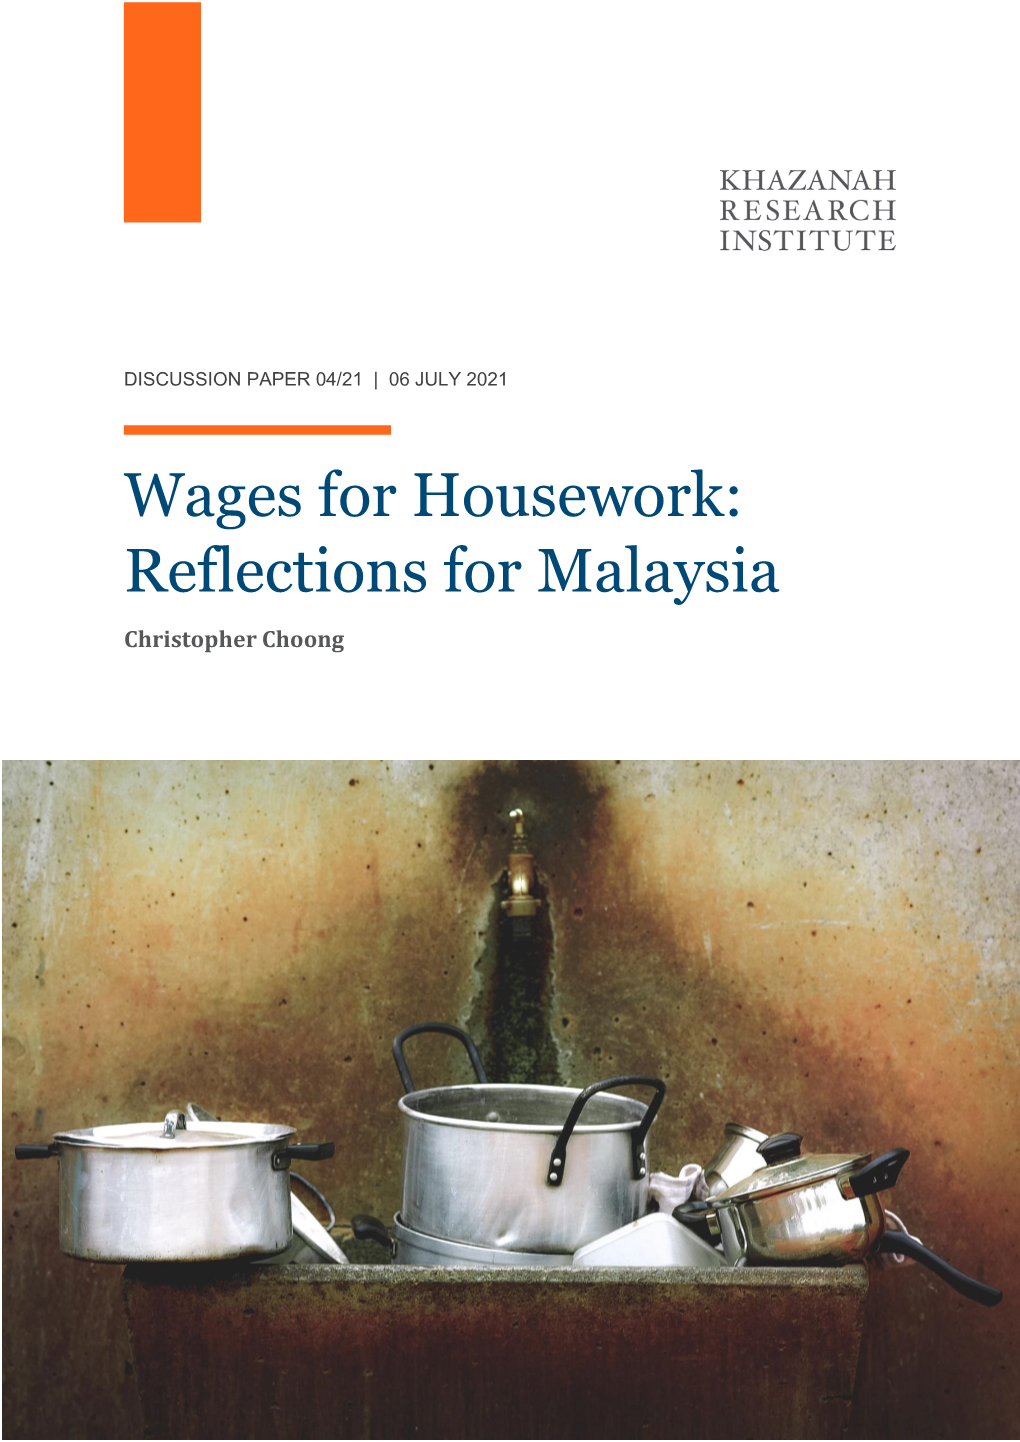 Wages for Housework: Reflections for Malaysia